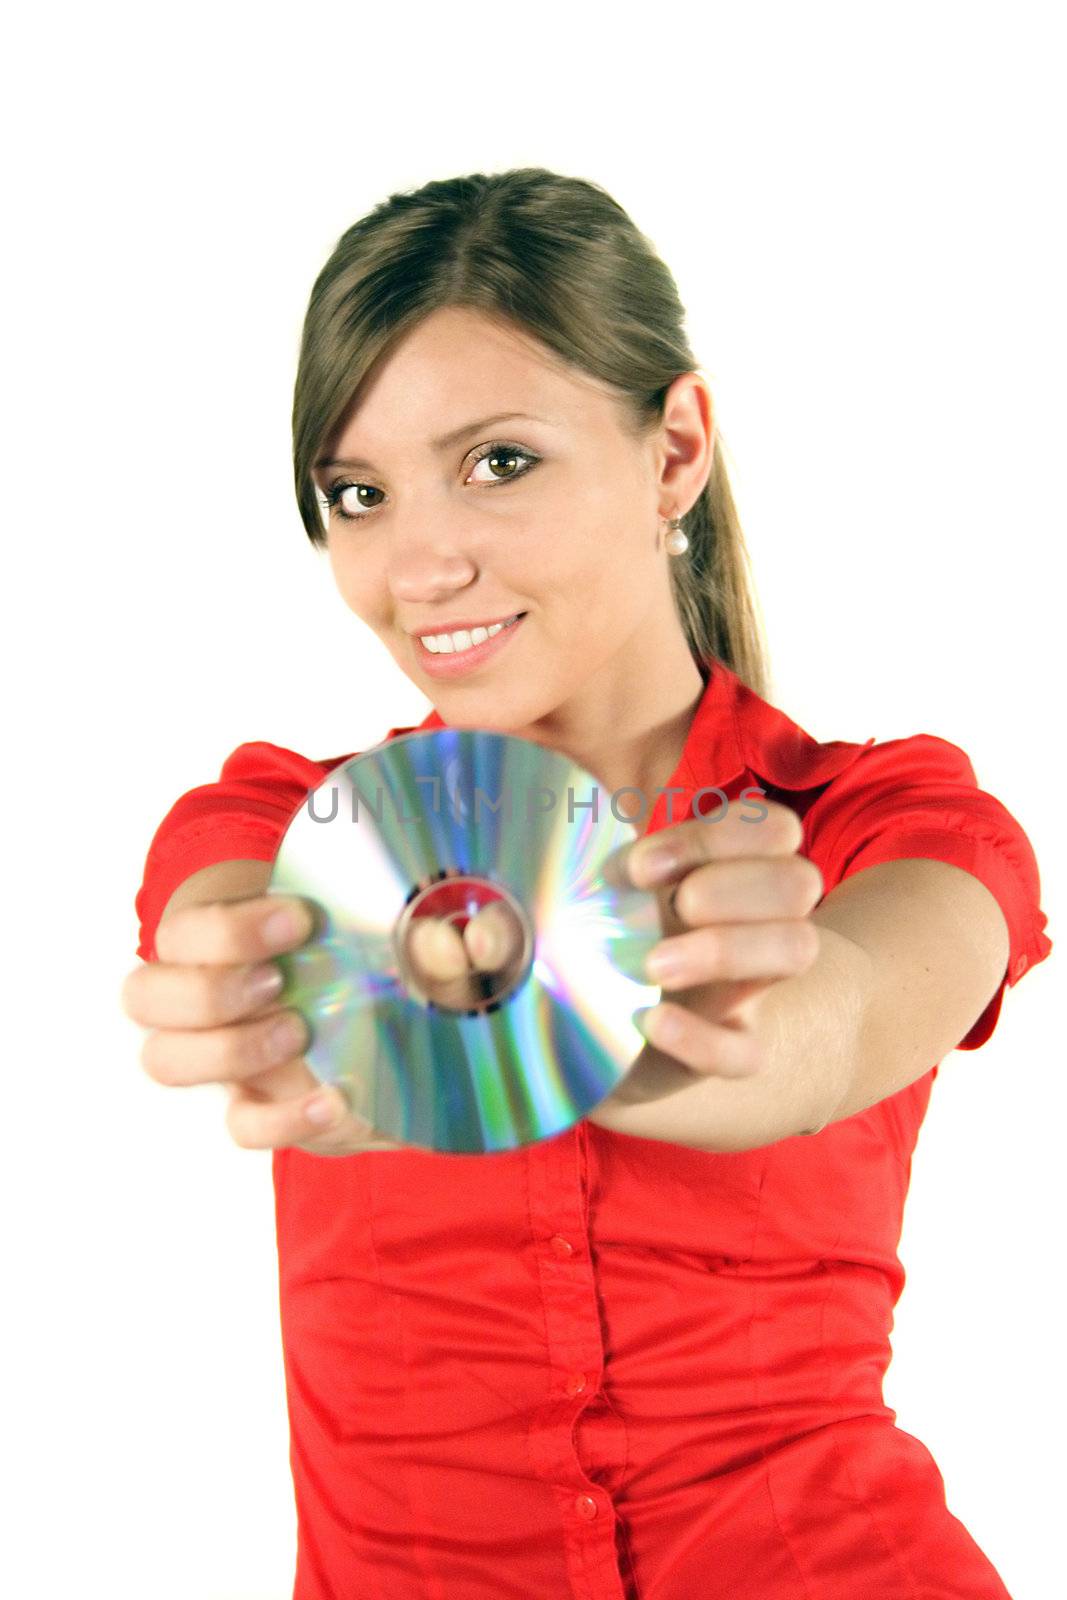 A young handsome woman bending a cd or dvd. All isolated on white background.